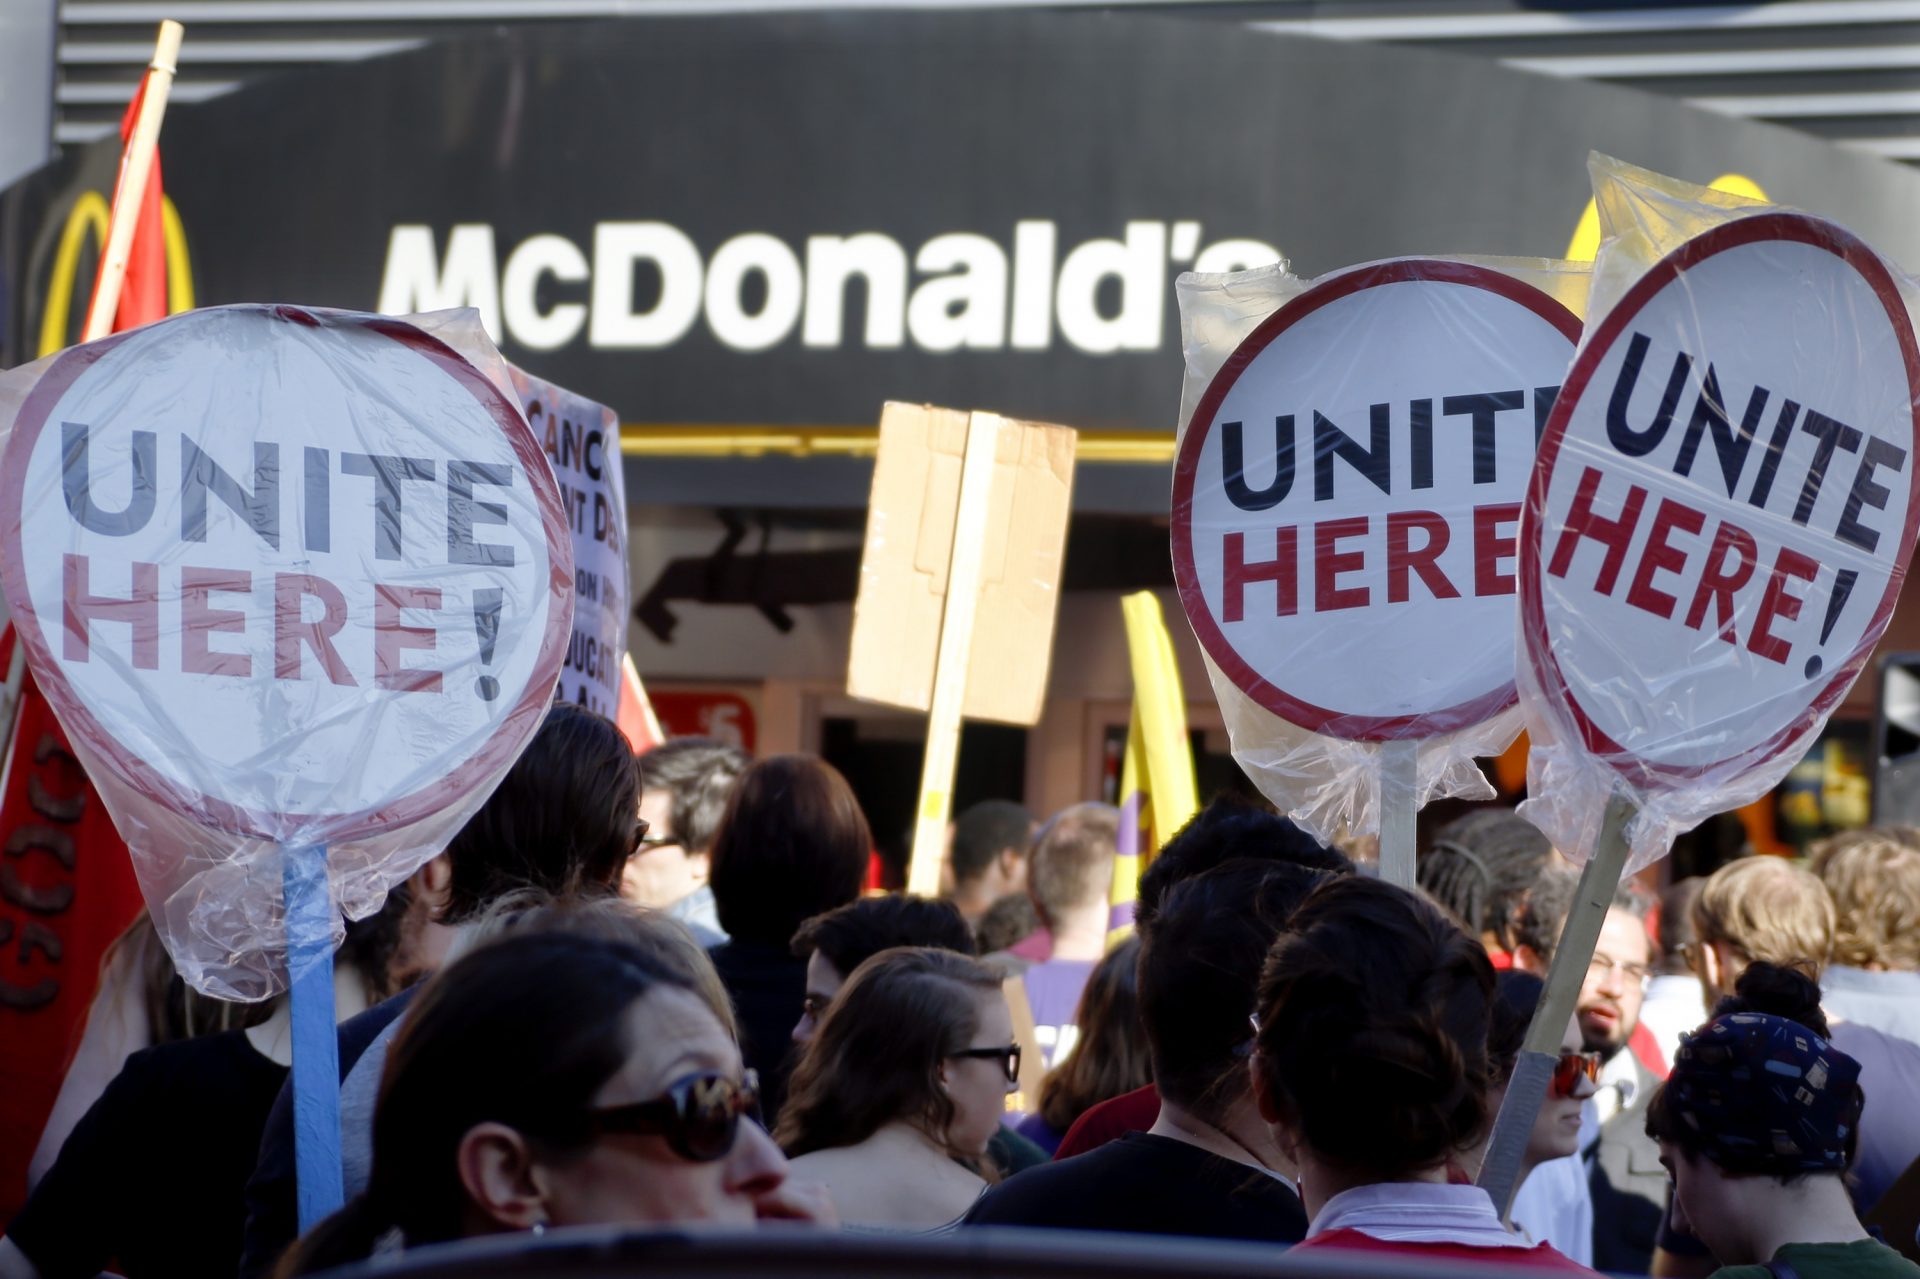 FILE PHOTO: Union organizers, students, and supporters for a $15 an hour wage wave their signs during a stop in front of a McDonalds restaurant as they march through the Oakland section of Pittsburgh, Thursday, April 14, 2016.